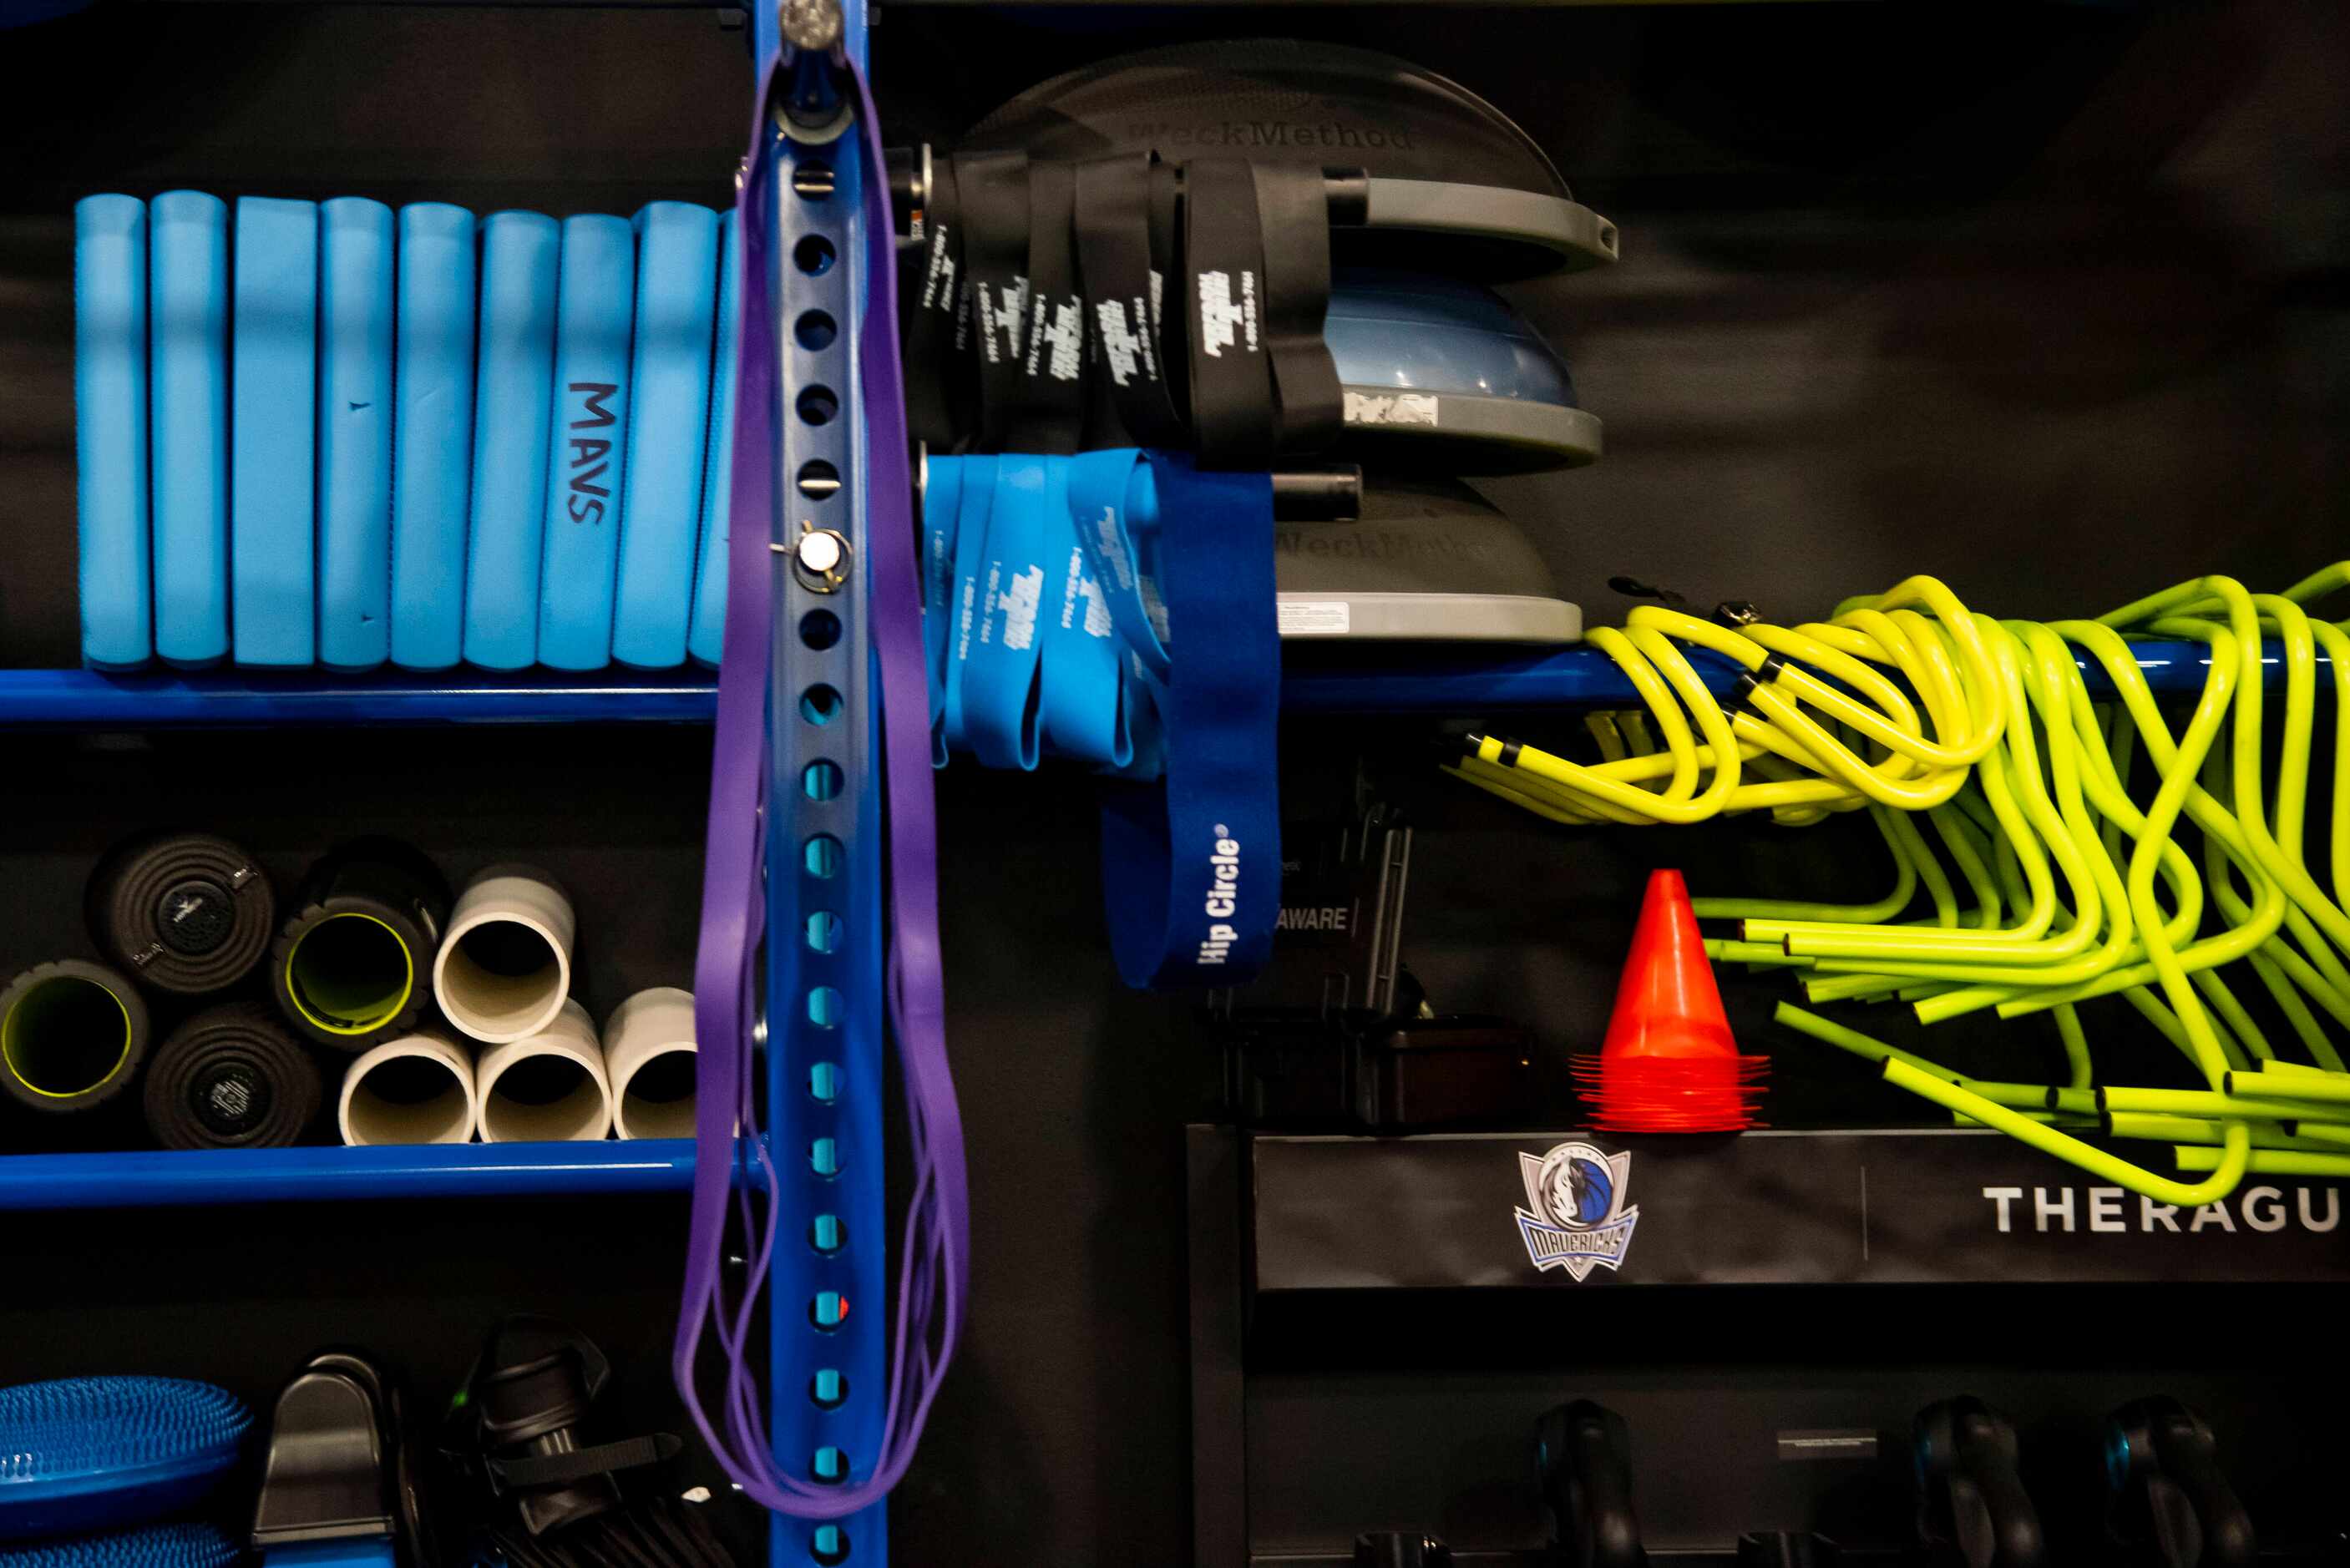 Equipment in the weight room area at the Dallas Mavericks BioSteel Practice Center in...